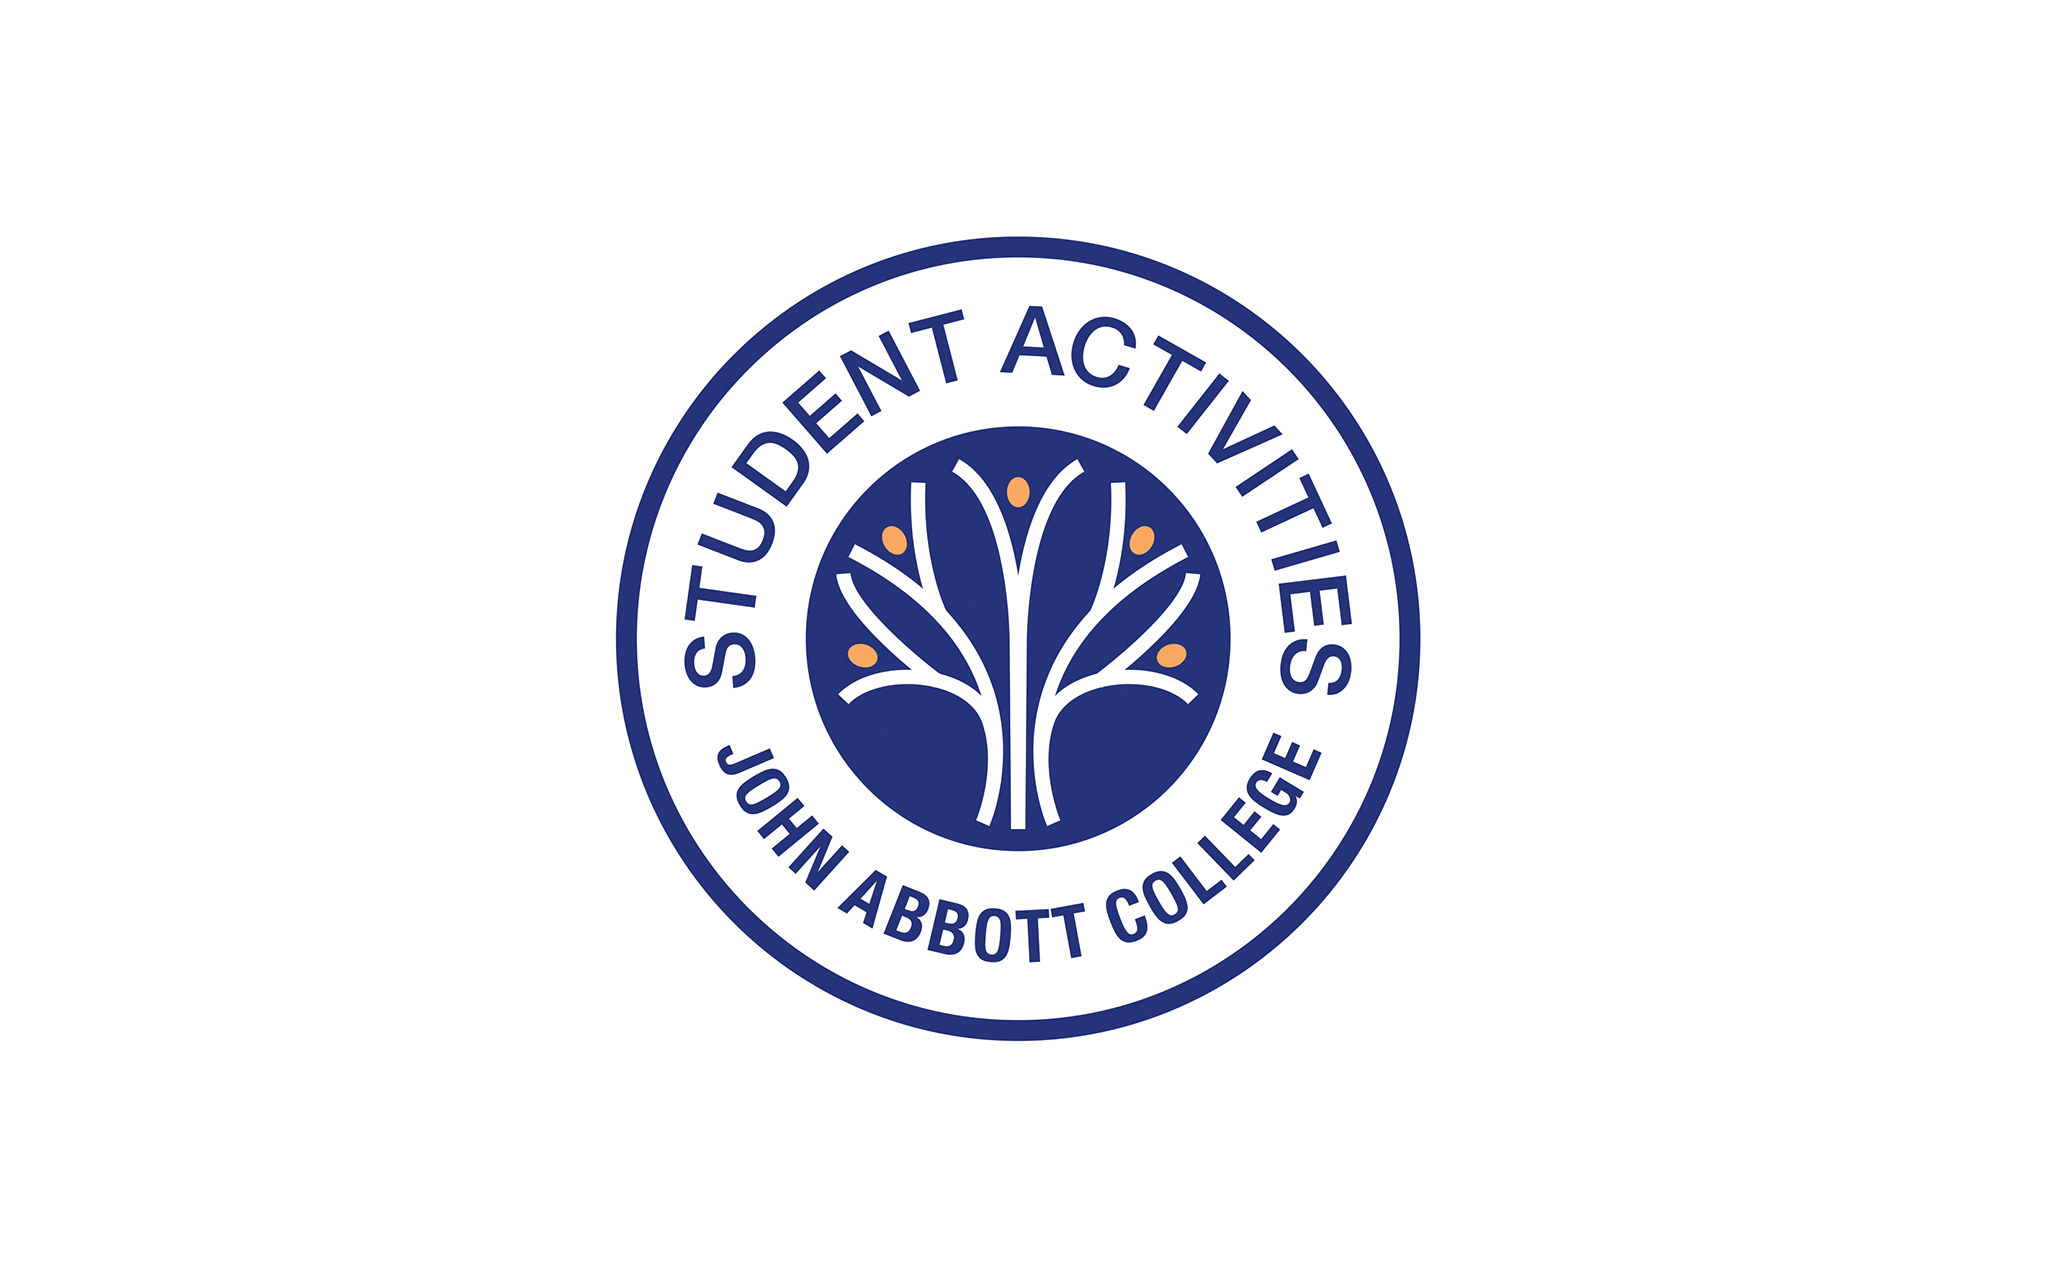 Logo I created with a team for Student Activities at John Abbott College.